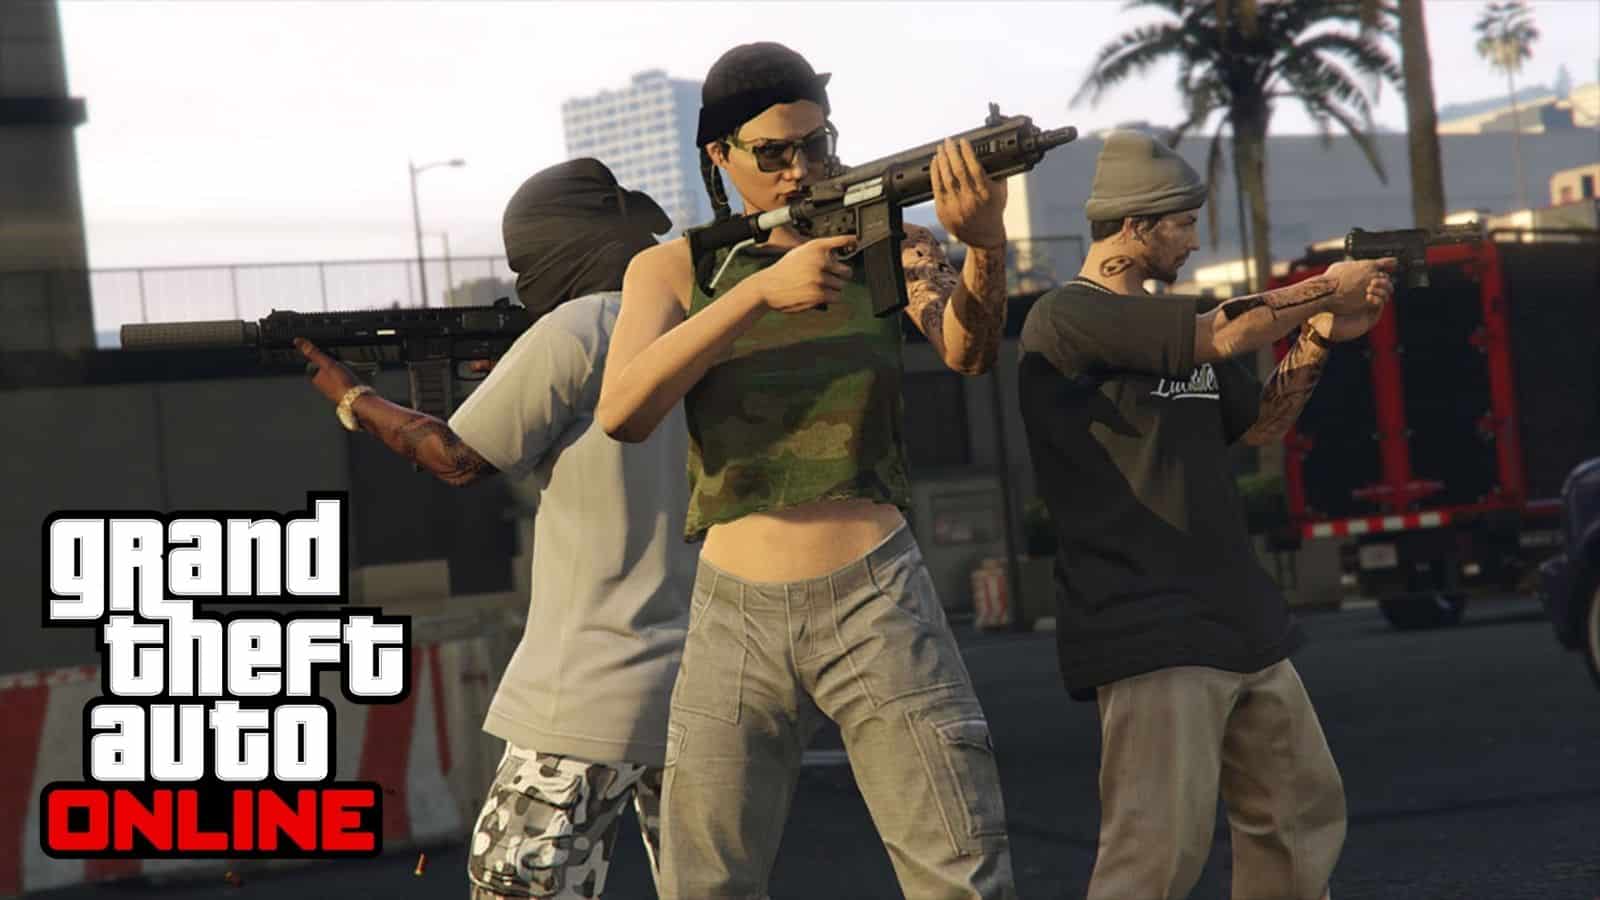 GTA Online players aiming weapons